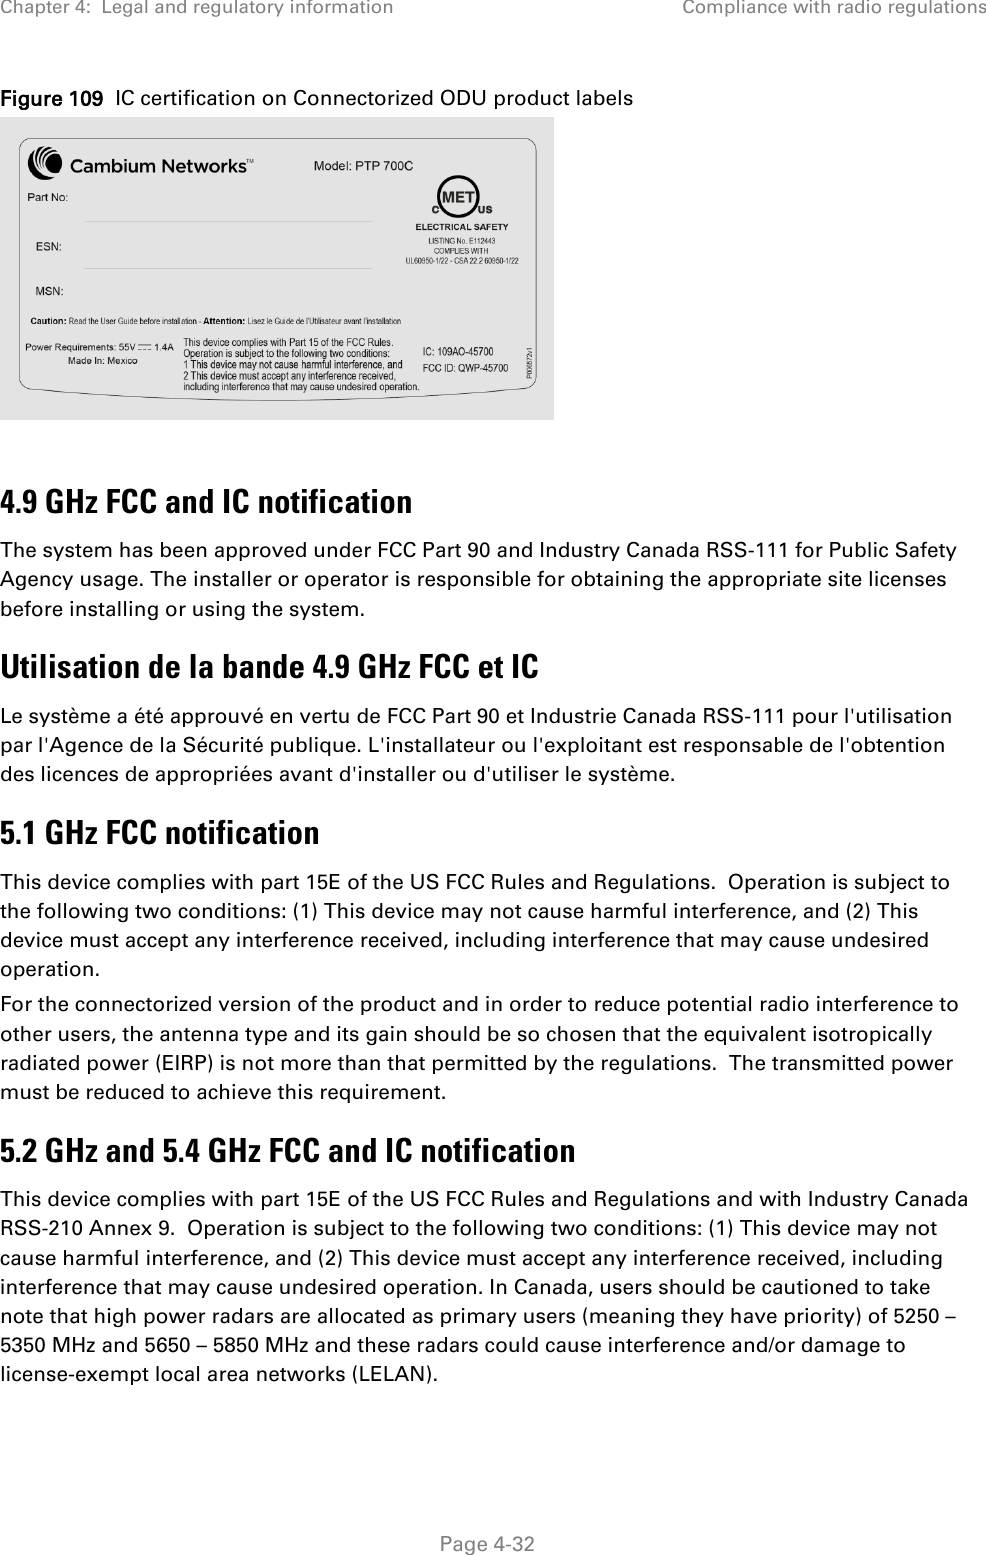 Chapter 4:  Legal and regulatory information Compliance with radio regulations  Figure 109  IC certification on Connectorized ODU product labels   4.9 GHz FCC and IC notification The system has been approved under FCC Part 90 and Industry Canada RSS-111 for Public Safety Agency usage. The installer or operator is responsible for obtaining the appropriate site licenses before installing or using the system. Utilisation de la bande 4.9 GHz FCC et IC Le système a été approuvé en vertu de FCC Part 90 et Industrie Canada RSS-111 pour l&apos;utilisation par l&apos;Agence de la Sécurité publique. L&apos;installateur ou l&apos;exploitant est responsable de l&apos;obtention des licences de appropriées avant d&apos;installer ou d&apos;utiliser le système. 5.1 GHz FCC notification This device complies with part 15E of the US FCC Rules and Regulations.  Operation is subject to the following two conditions: (1) This device may not cause harmful interference, and (2) This device must accept any interference received, including interference that may cause undesired operation. For the connectorized version of the product and in order to reduce potential radio interference to other users, the antenna type and its gain should be so chosen that the equivalent isotropically radiated power (EIRP) is not more than that permitted by the regulations.  The transmitted power must be reduced to achieve this requirement. 5.2 GHz and 5.4 GHz FCC and IC notification This device complies with part 15E of the US FCC Rules and Regulations and with Industry Canada RSS-210 Annex 9.  Operation is subject to the following two conditions: (1) This device may not cause harmful interference, and (2) This device must accept any interference received, including interference that may cause undesired operation. In Canada, users should be cautioned to take note that high power radars are allocated as primary users (meaning they have priority) of 5250 – 5350 MHz and 5650 – 5850 MHz and these radars could cause interference and/or damage to license-exempt local area networks (LELAN).  Page 4-32 